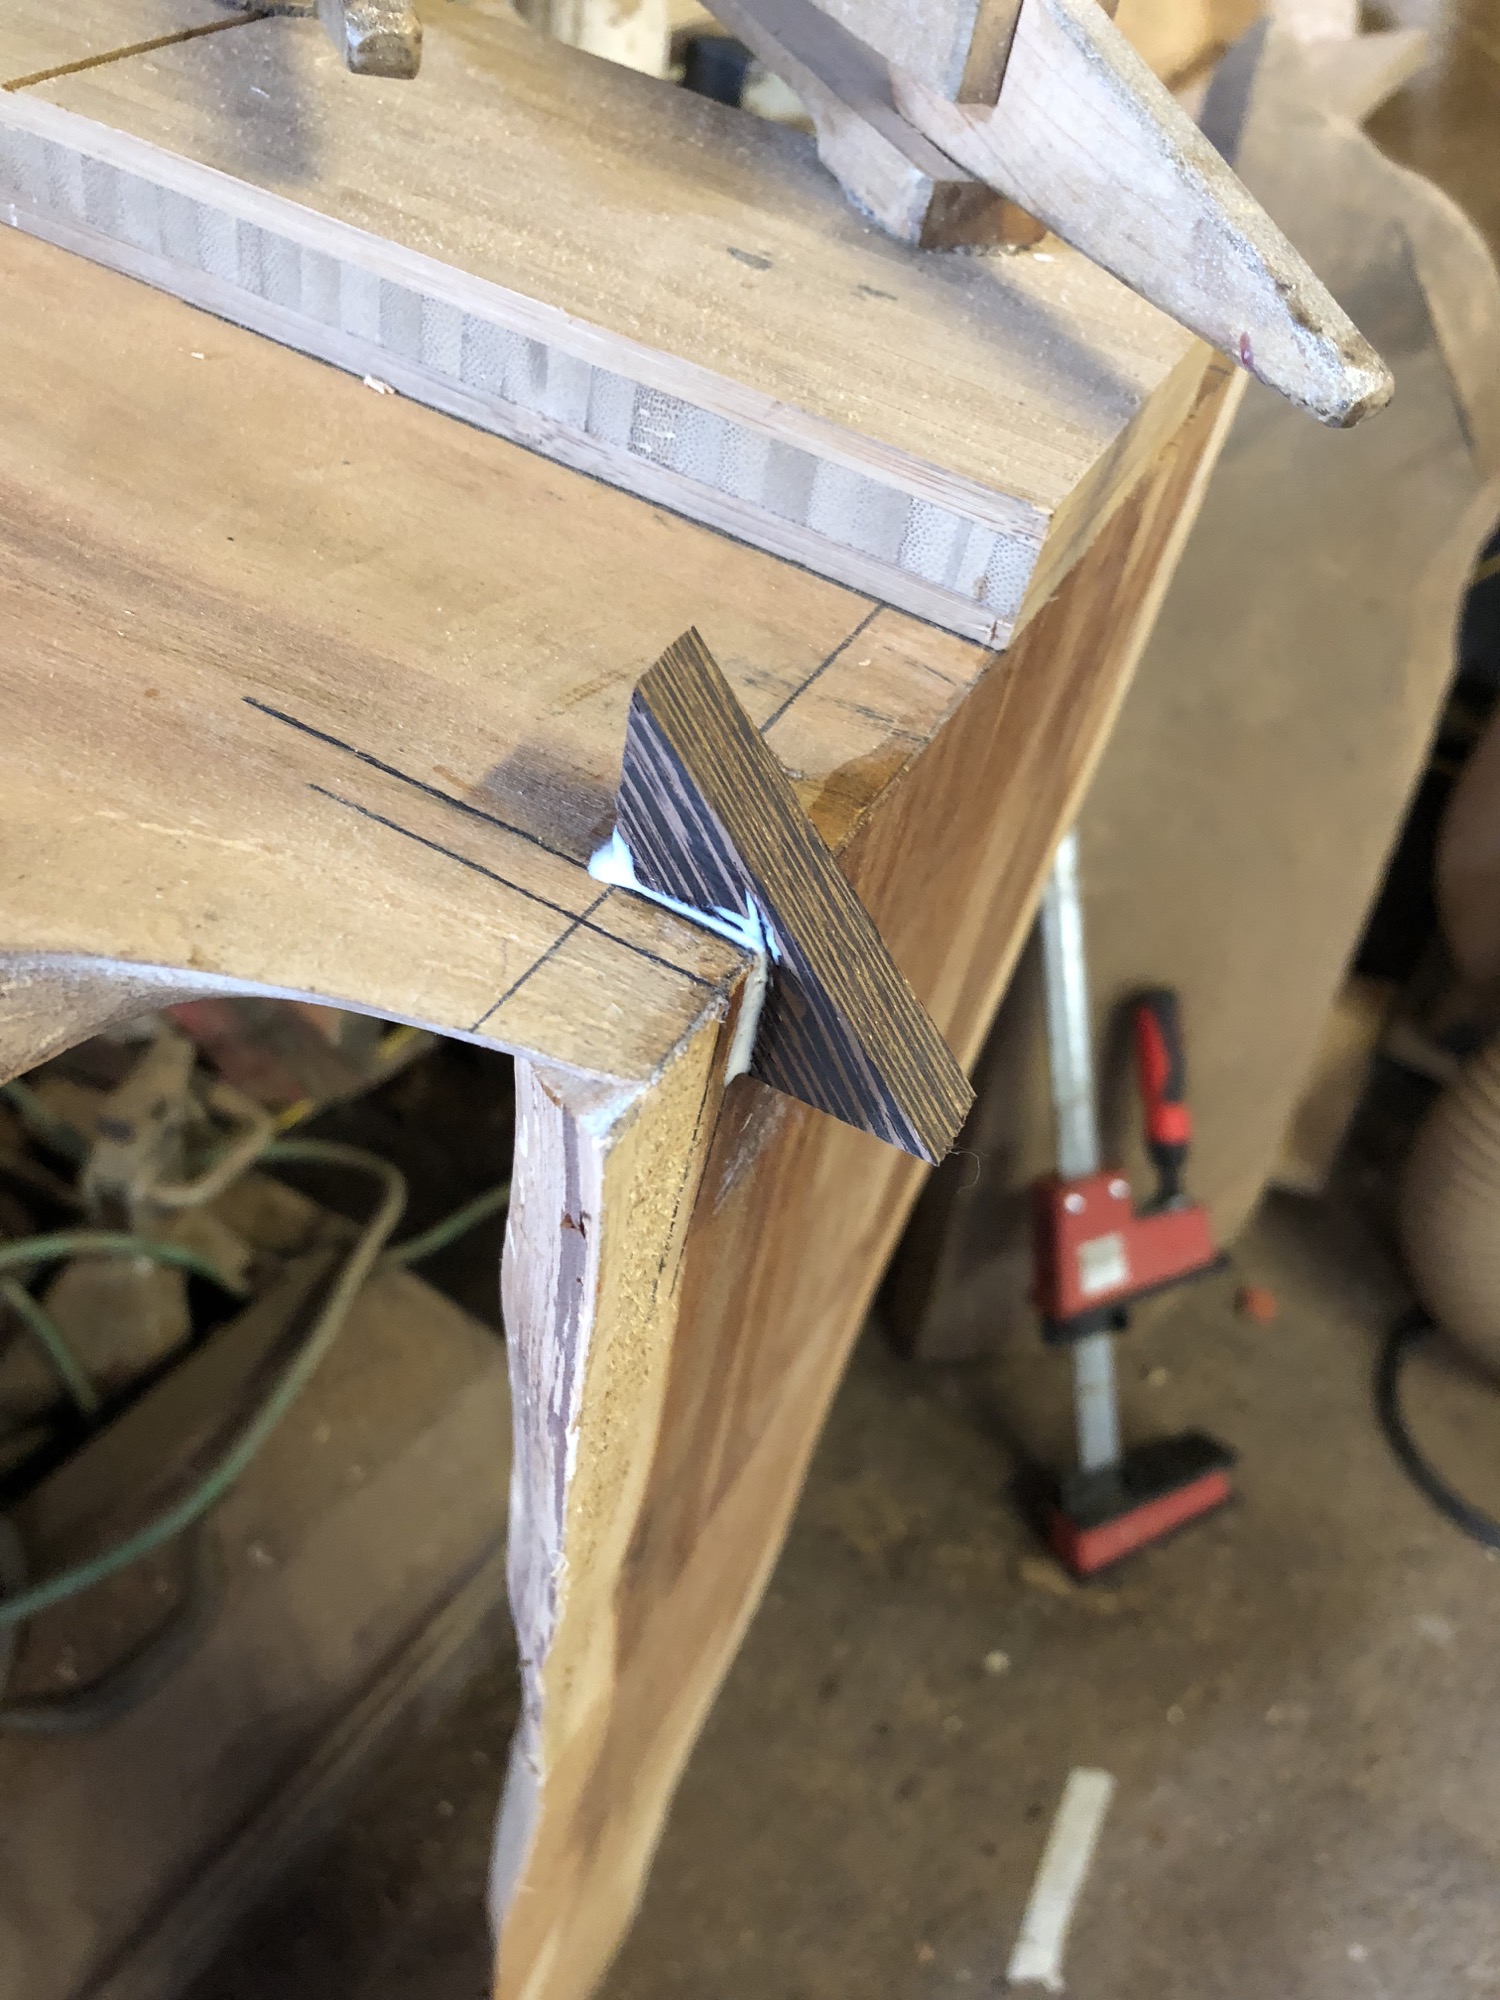  I cut a little slot, and glue the wenge spline in place. Two of these splines give this joint a huge amount of strength, and the wenge gives a nice contrast in both color and texture. 